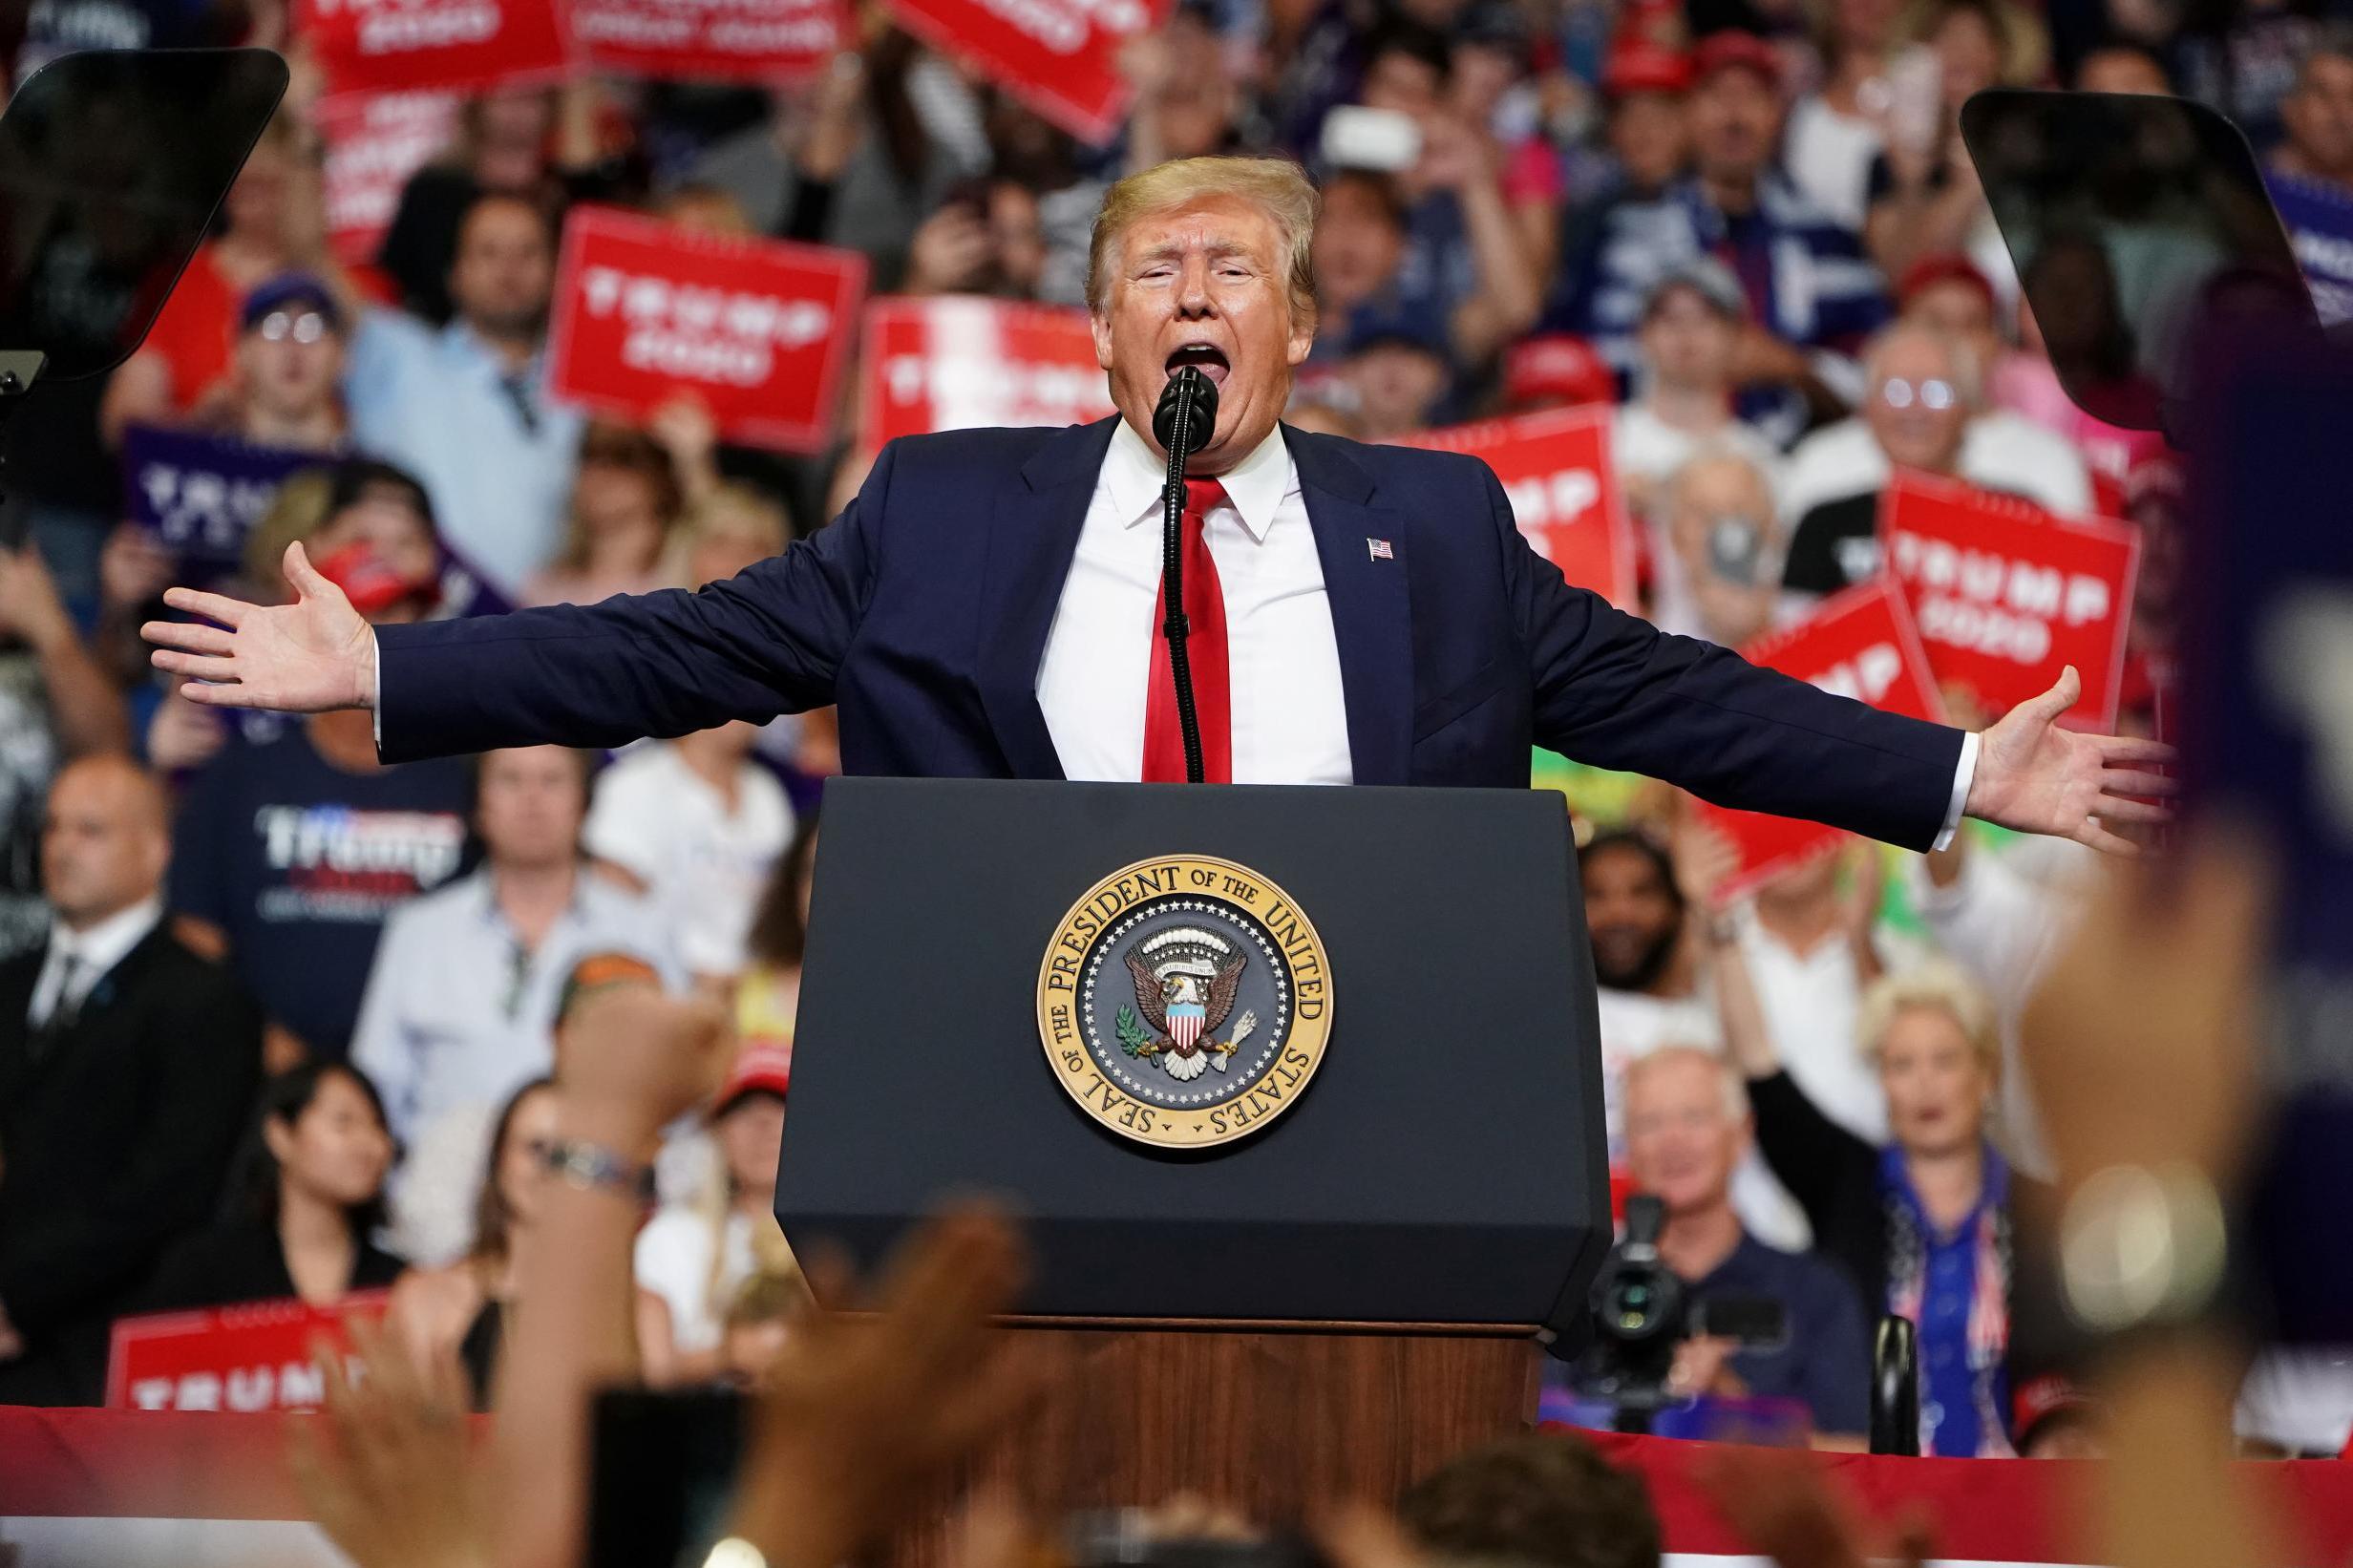 Donald Trump formally launches 2020 re-election bid - VIDEO